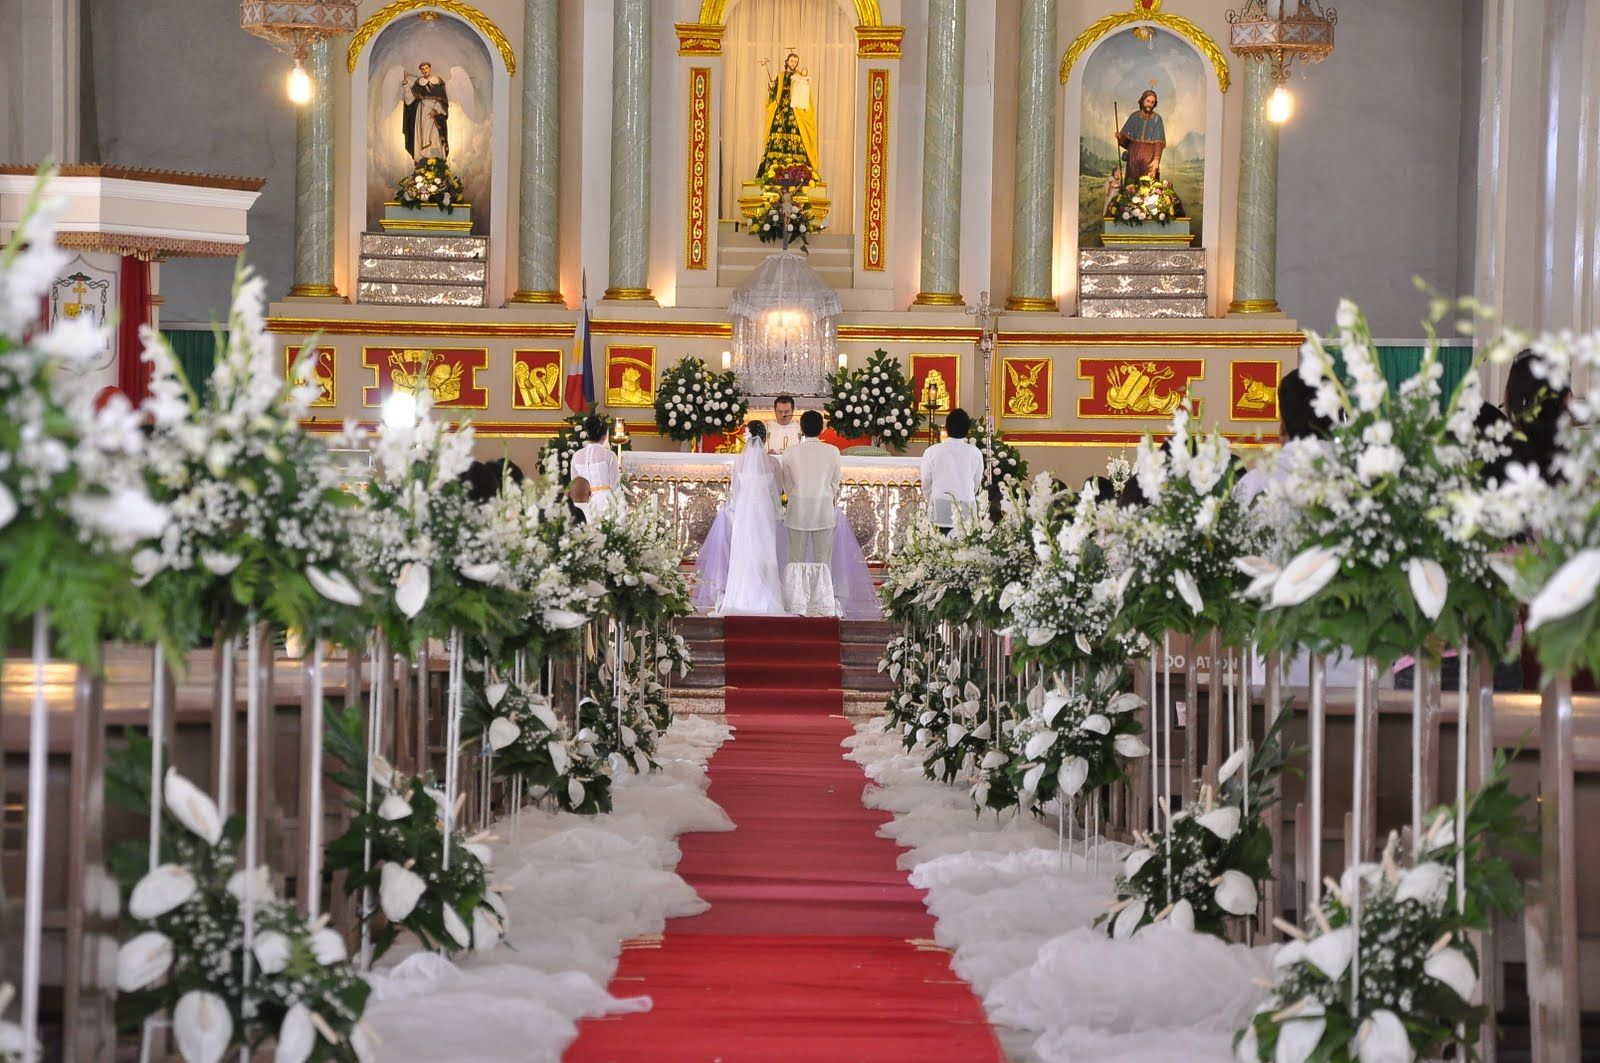 for church catholic church decorations for wedding church decoration ... -   Decoration for the church.